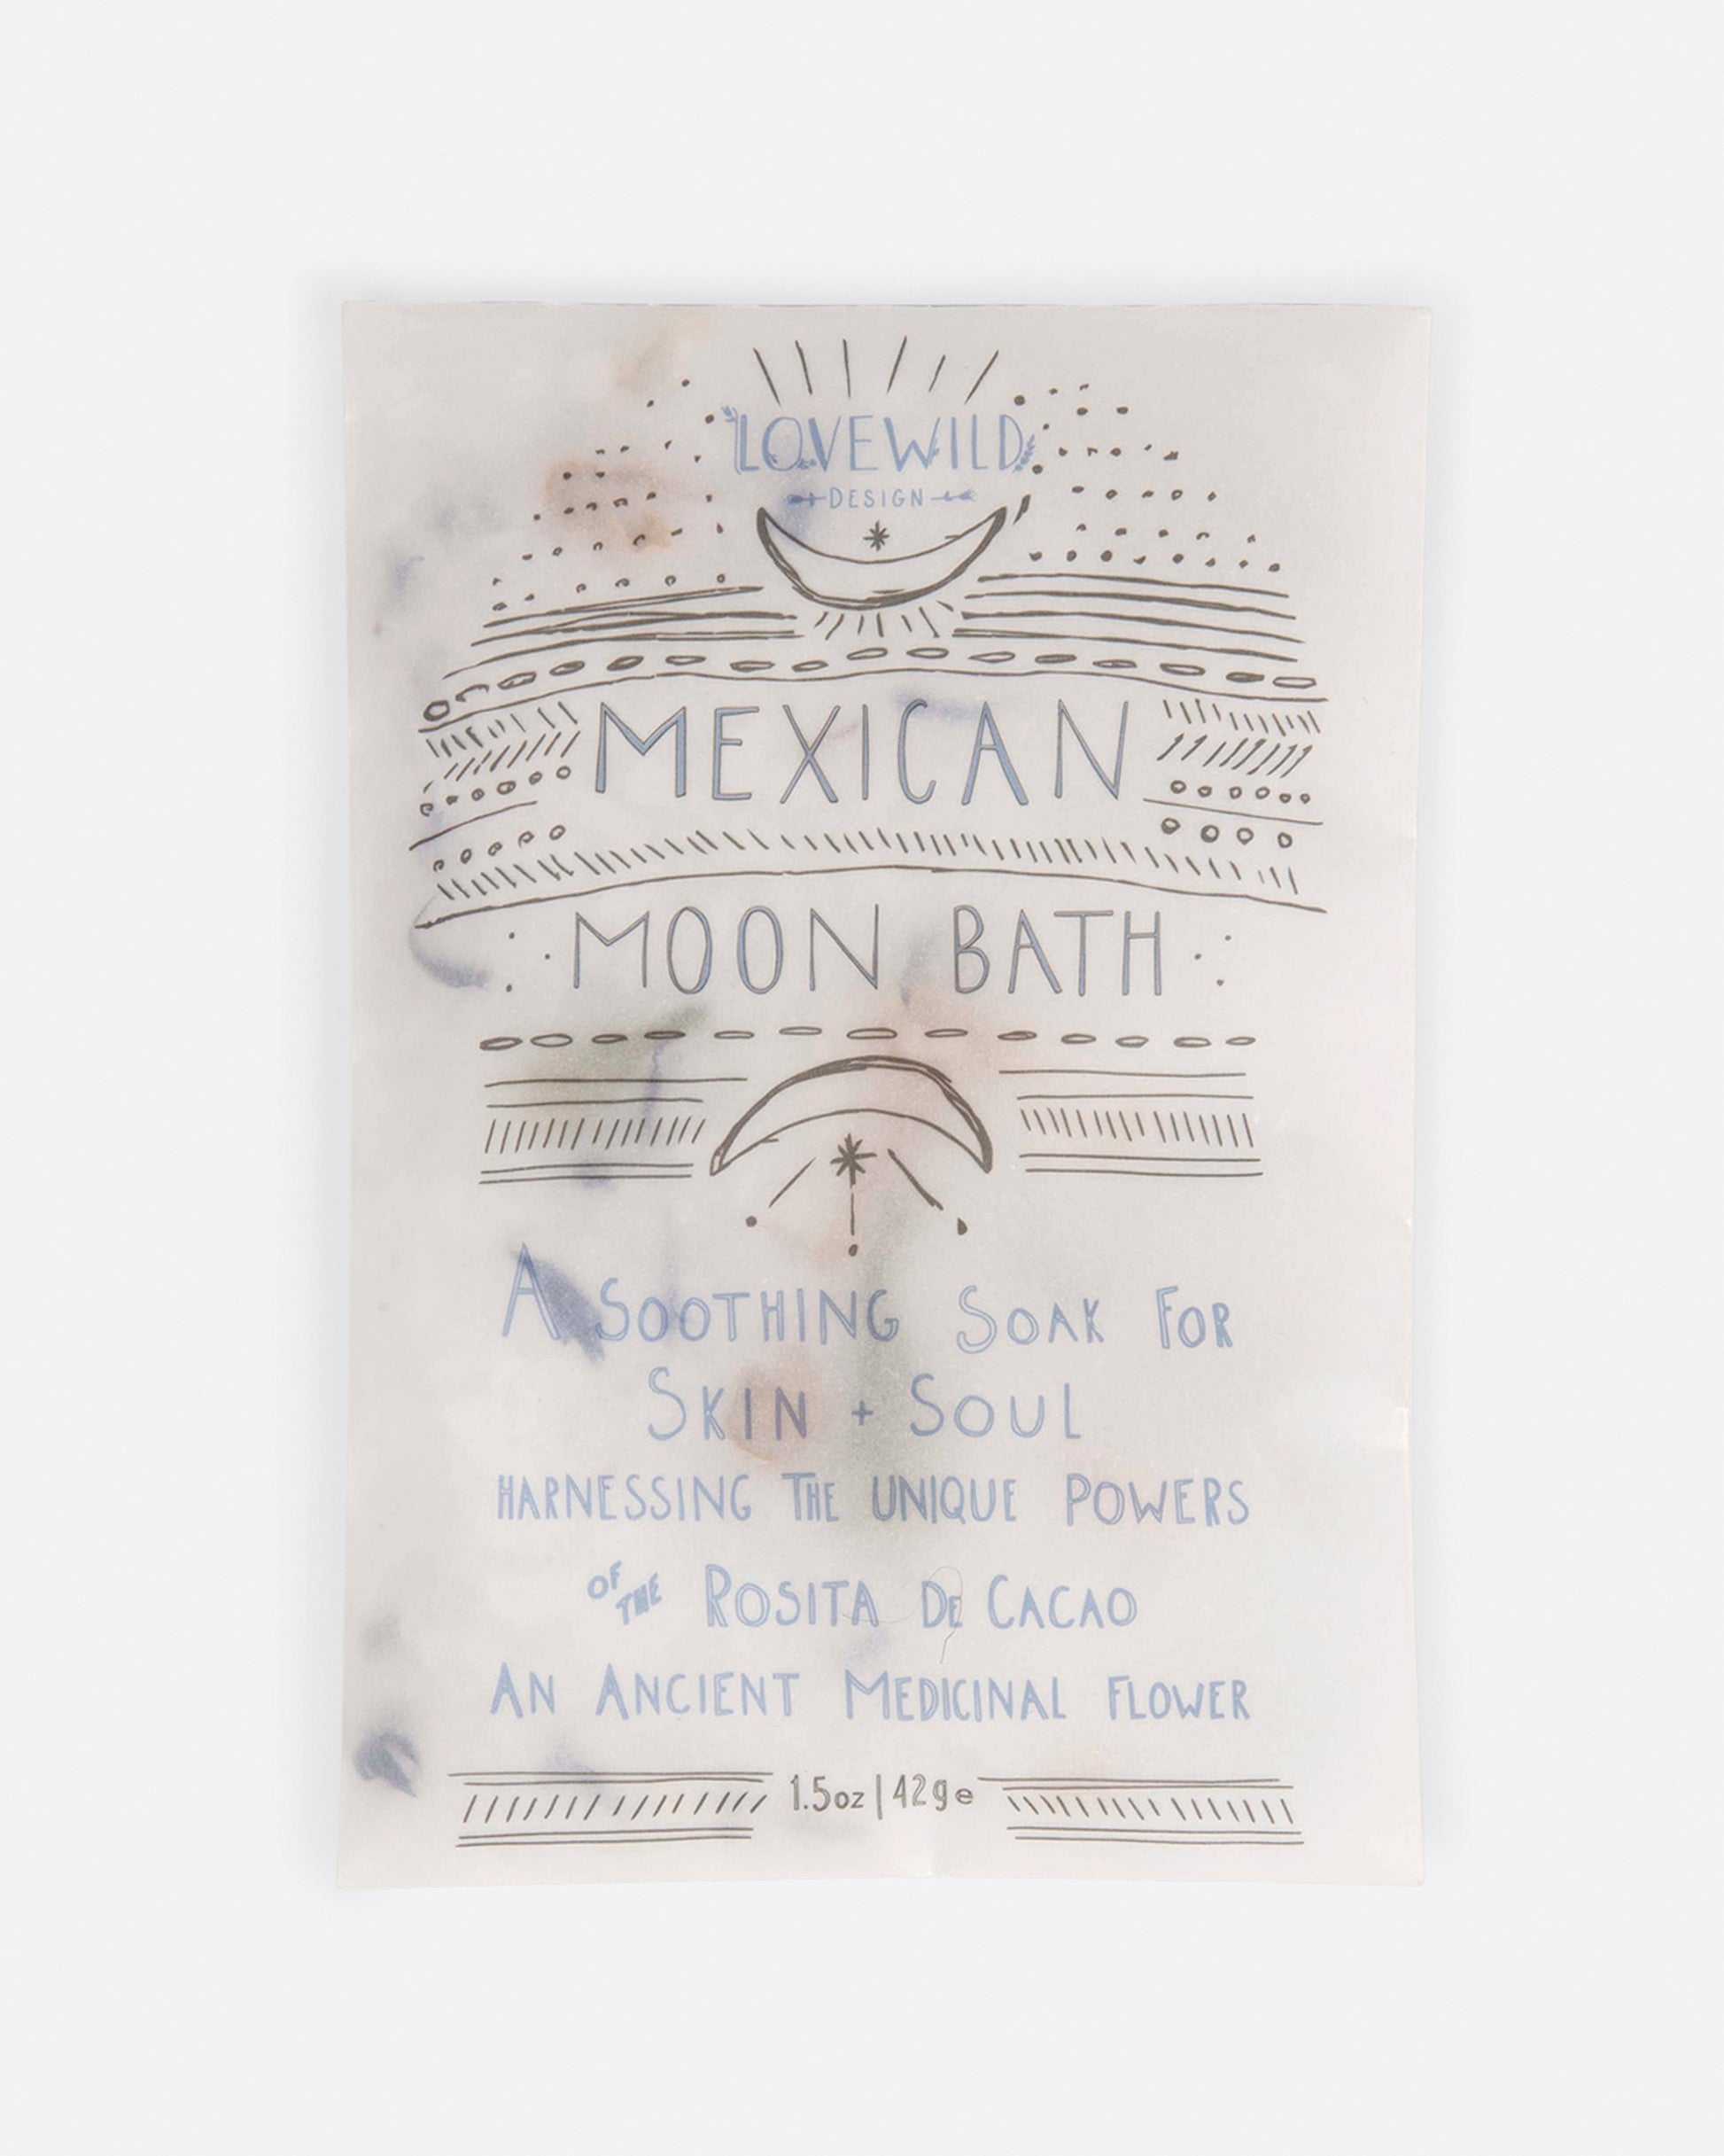 The wax paper envelope packaging of the Mexican Moon Bath Salts